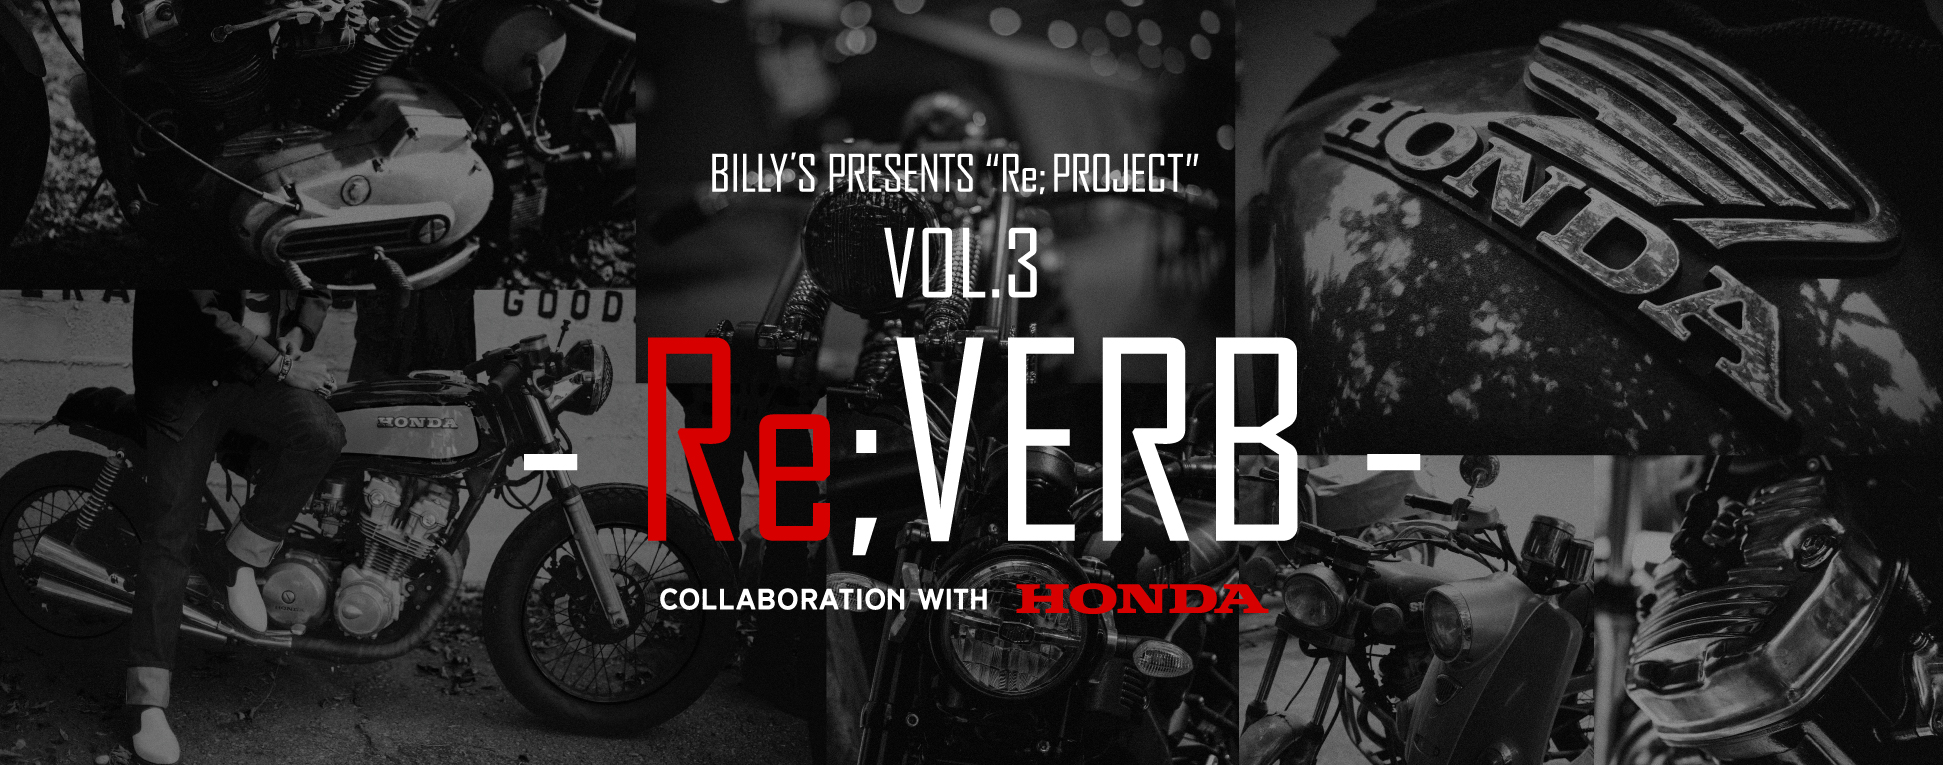 Re;VERB COLLABORATION with HONDA